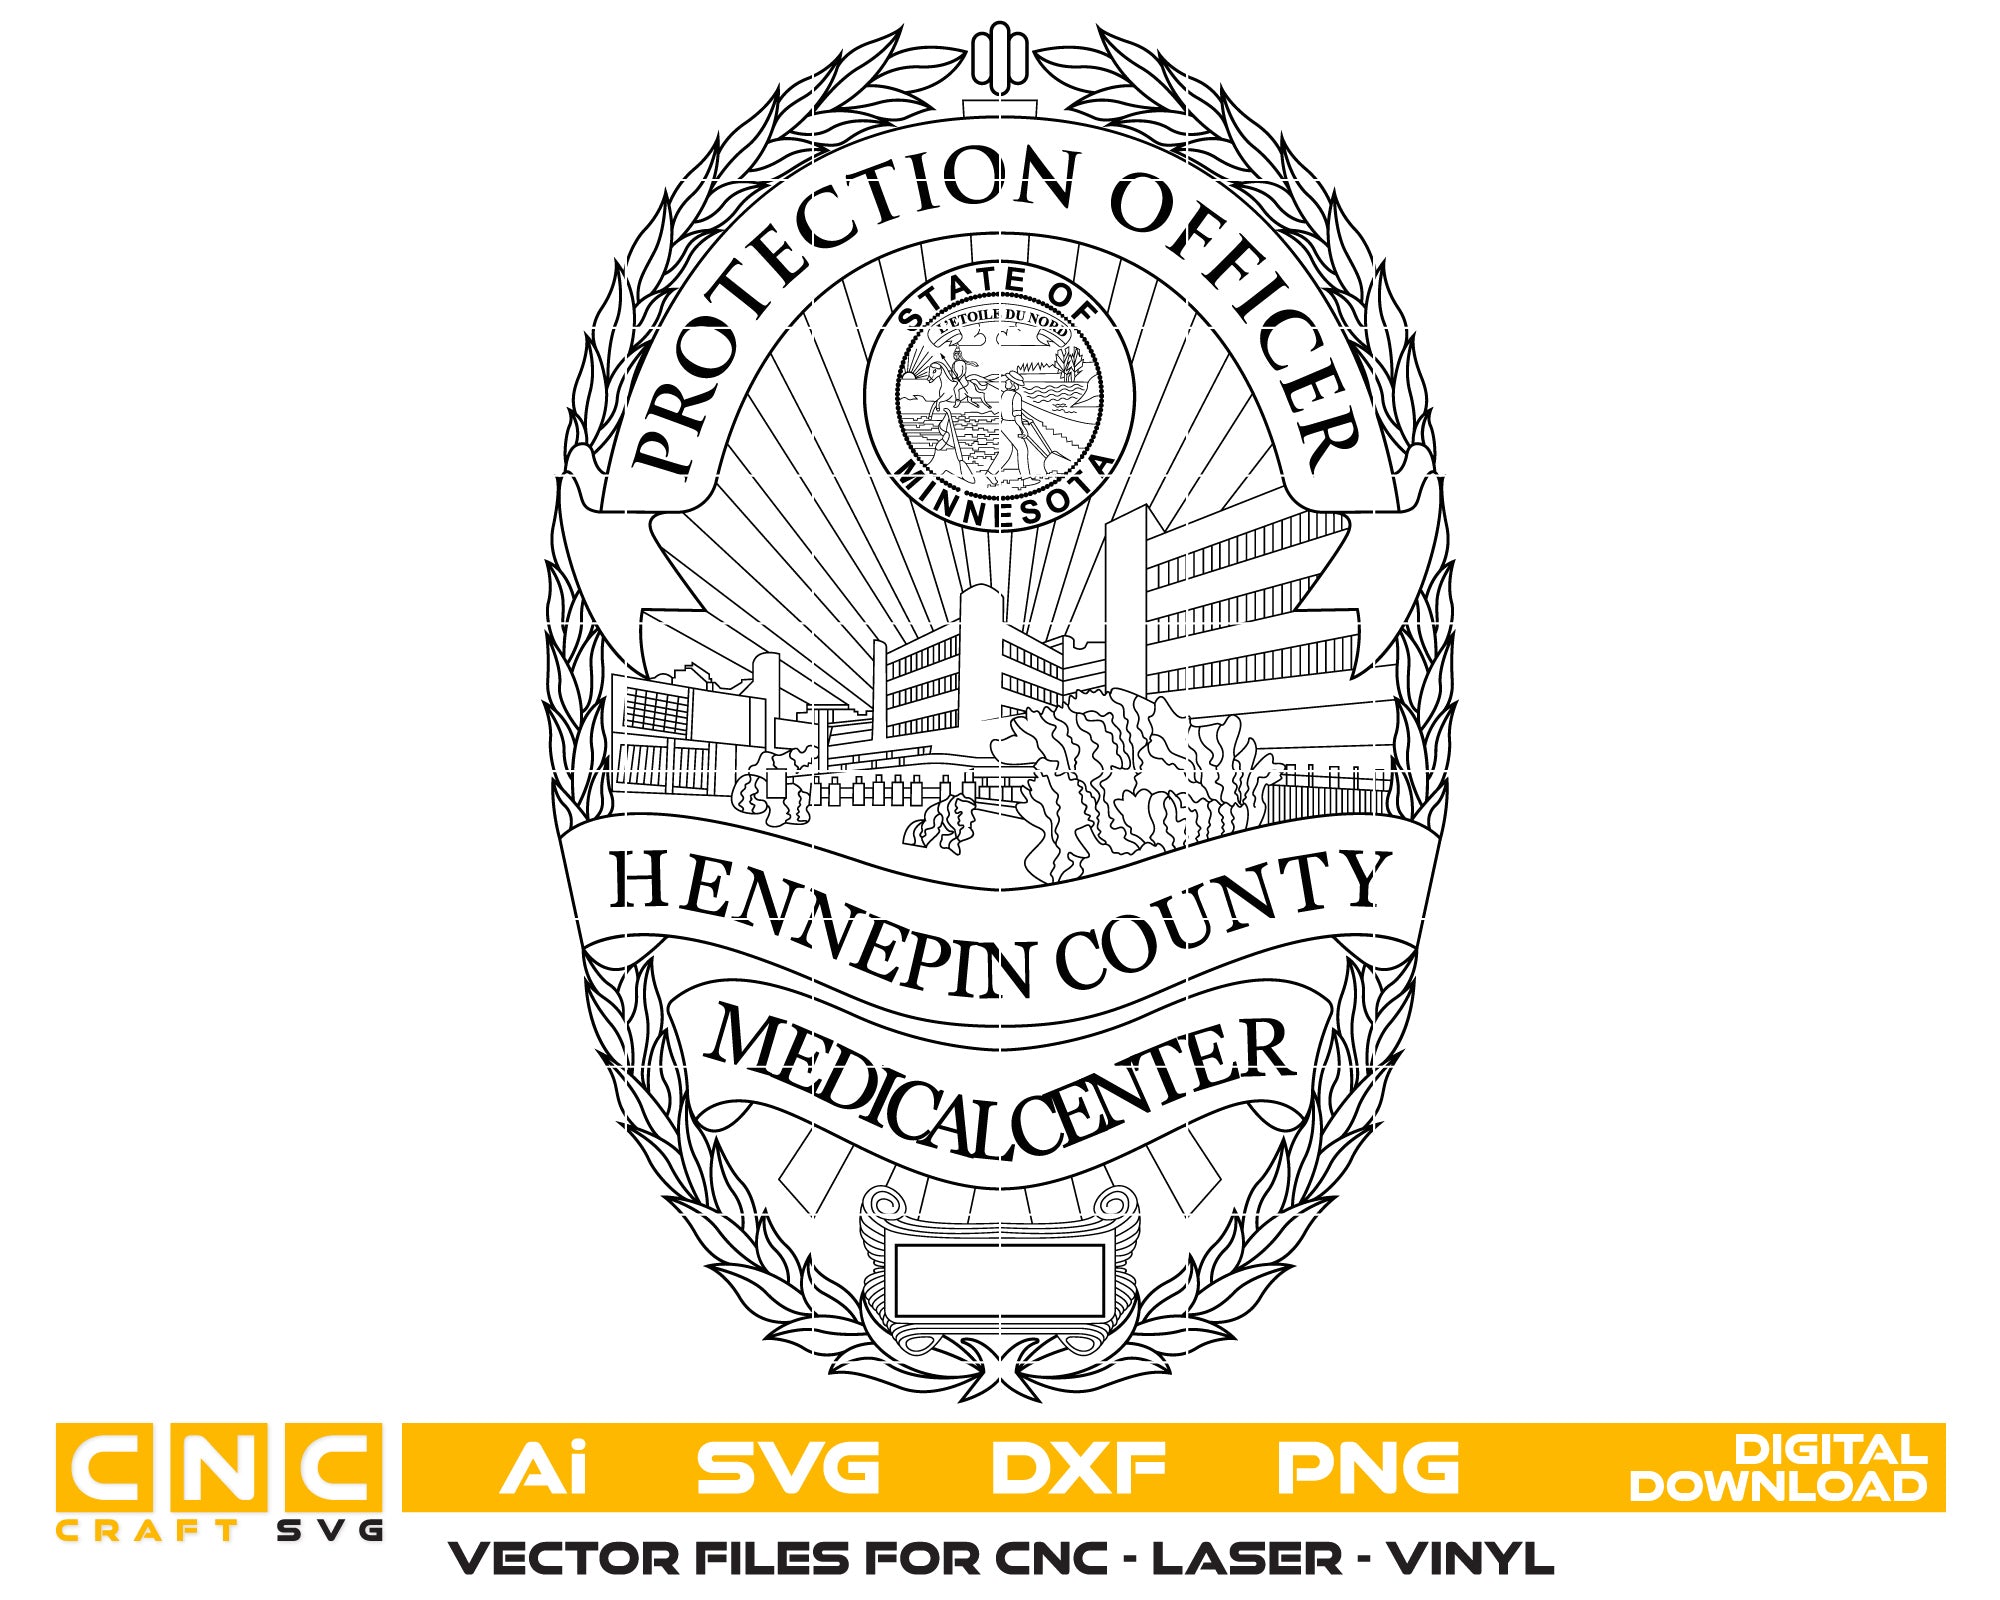 Minnesota Hennepin County Medical Center Protection Officer Seal vector art